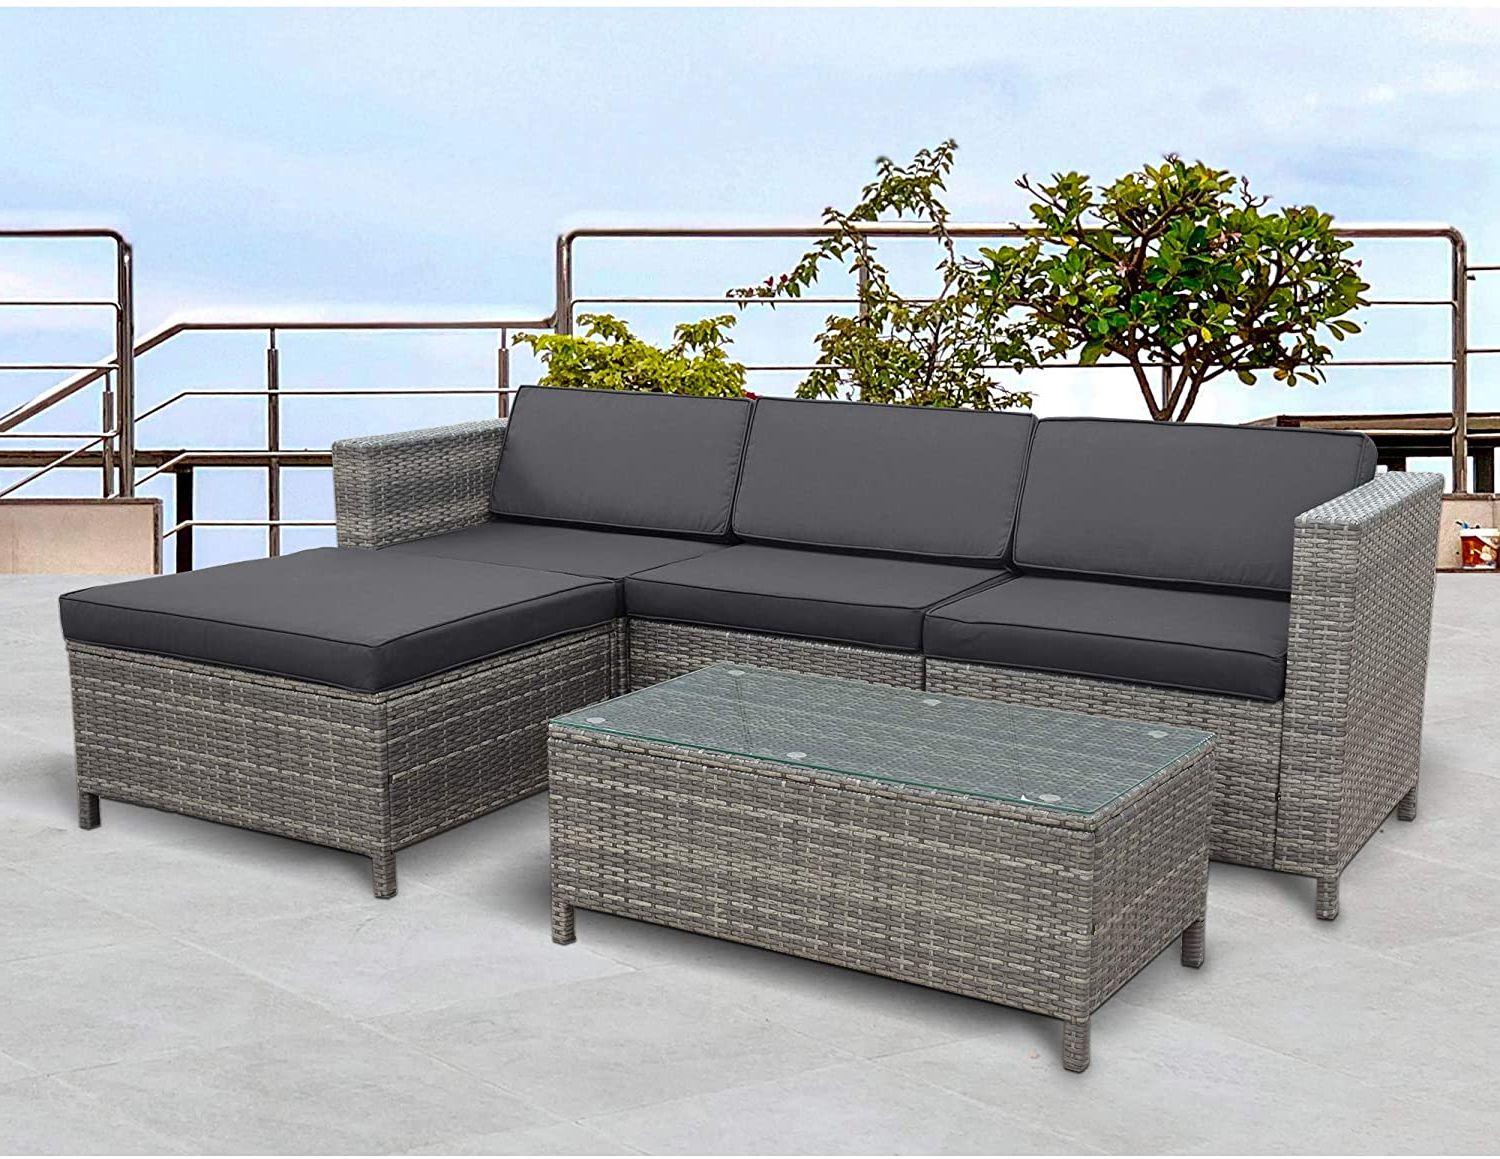 5 Piece Outdoor Patio Furniture Set, All Weather Wicker Rattan Regarding Best And Newest Outdoor Wicker Sectional Sofa Sets (View 2 of 15)